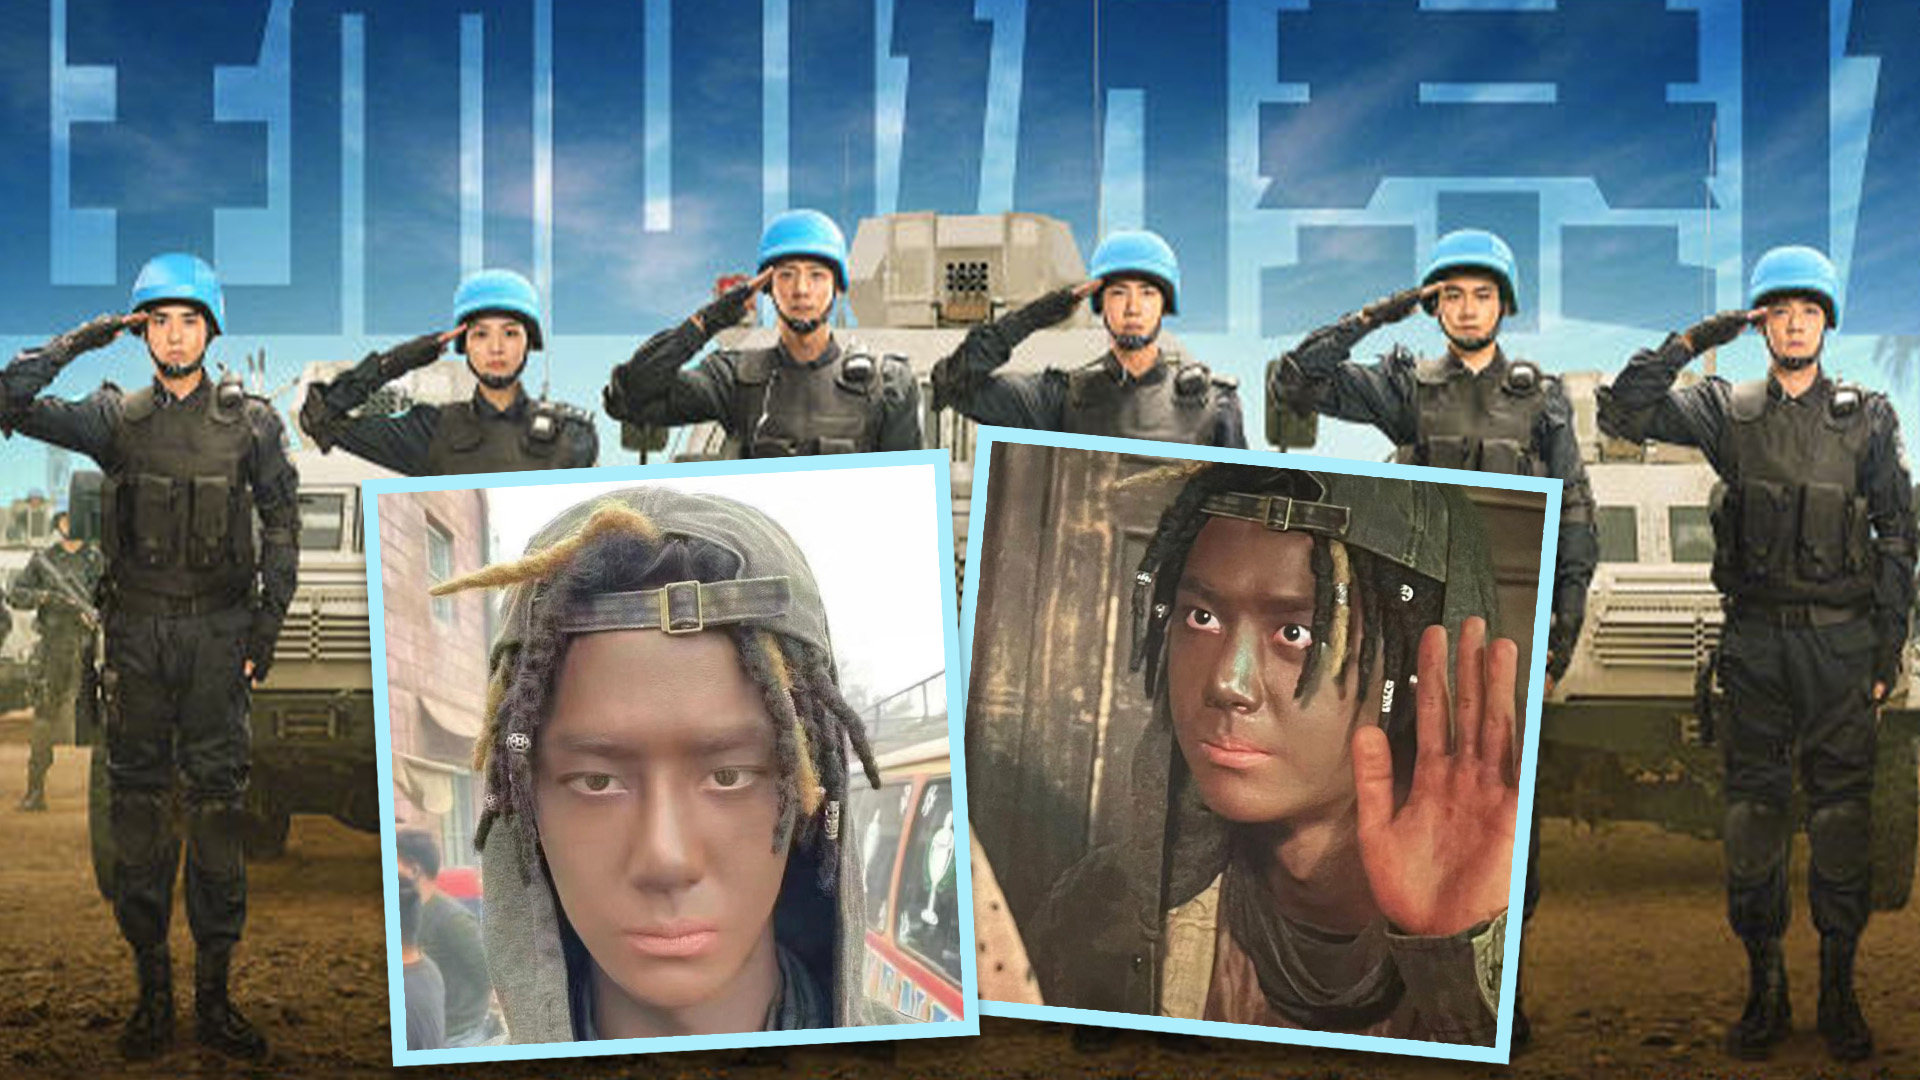 Two top actors from China are facing a online criticism for using blackface makeup in a film about Chinese peacekeepers in Africa. Photo: SCMP composite/Weibo/X.com